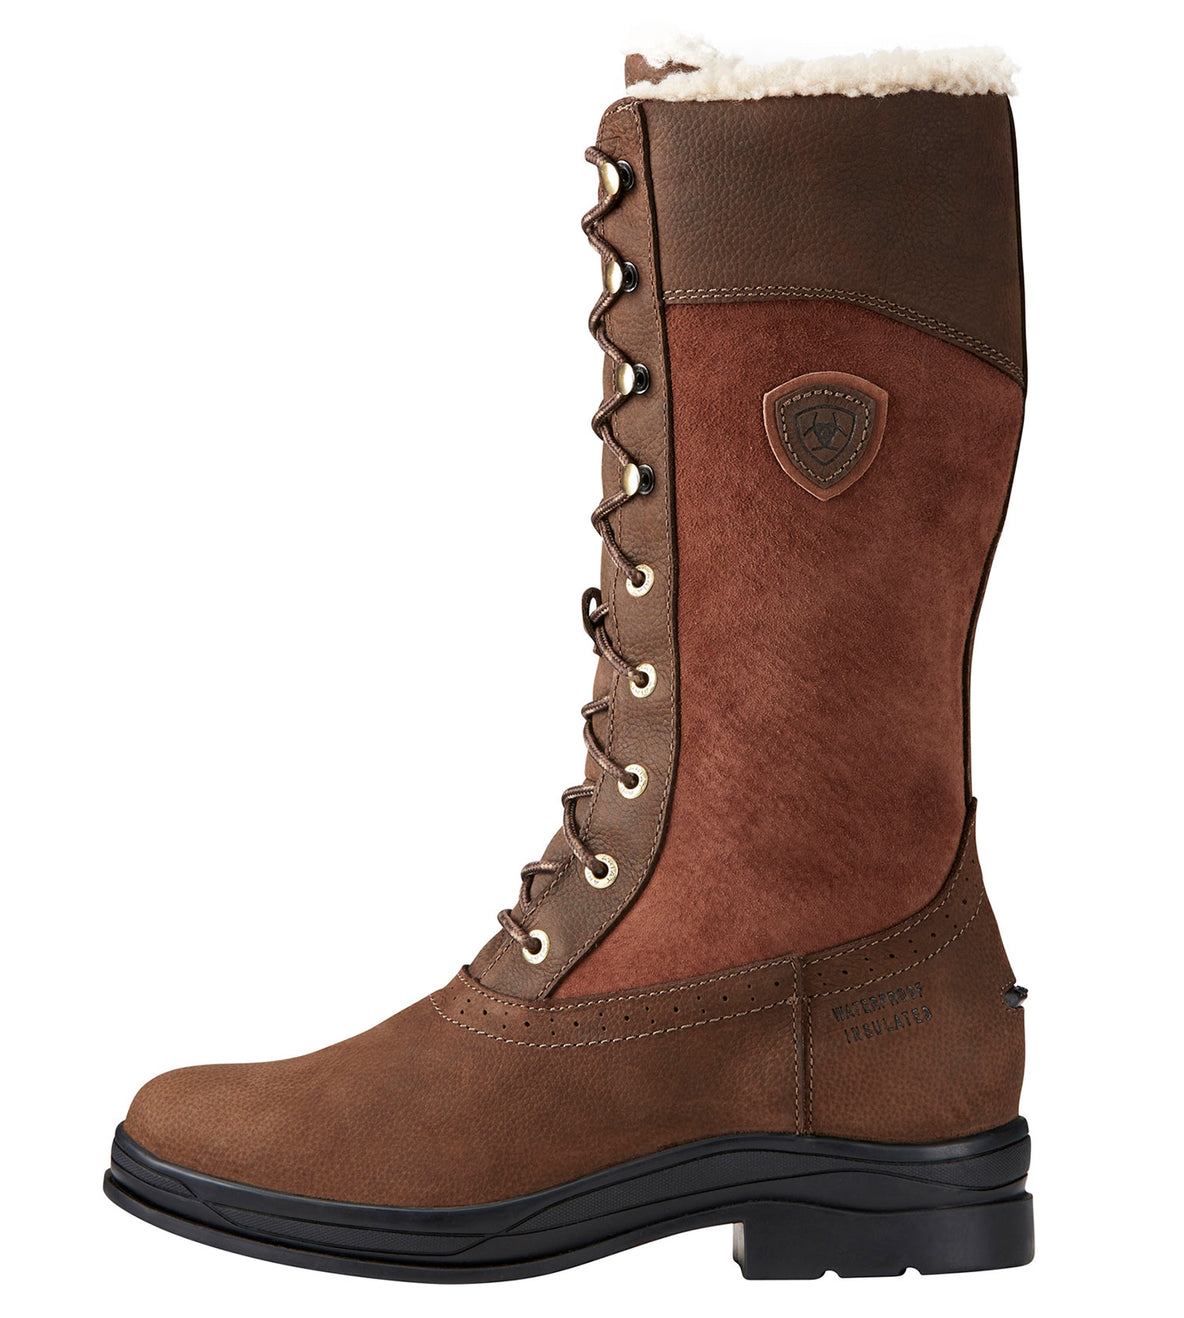 Ariat Wythburn Insulated Waterproof Boots | Java